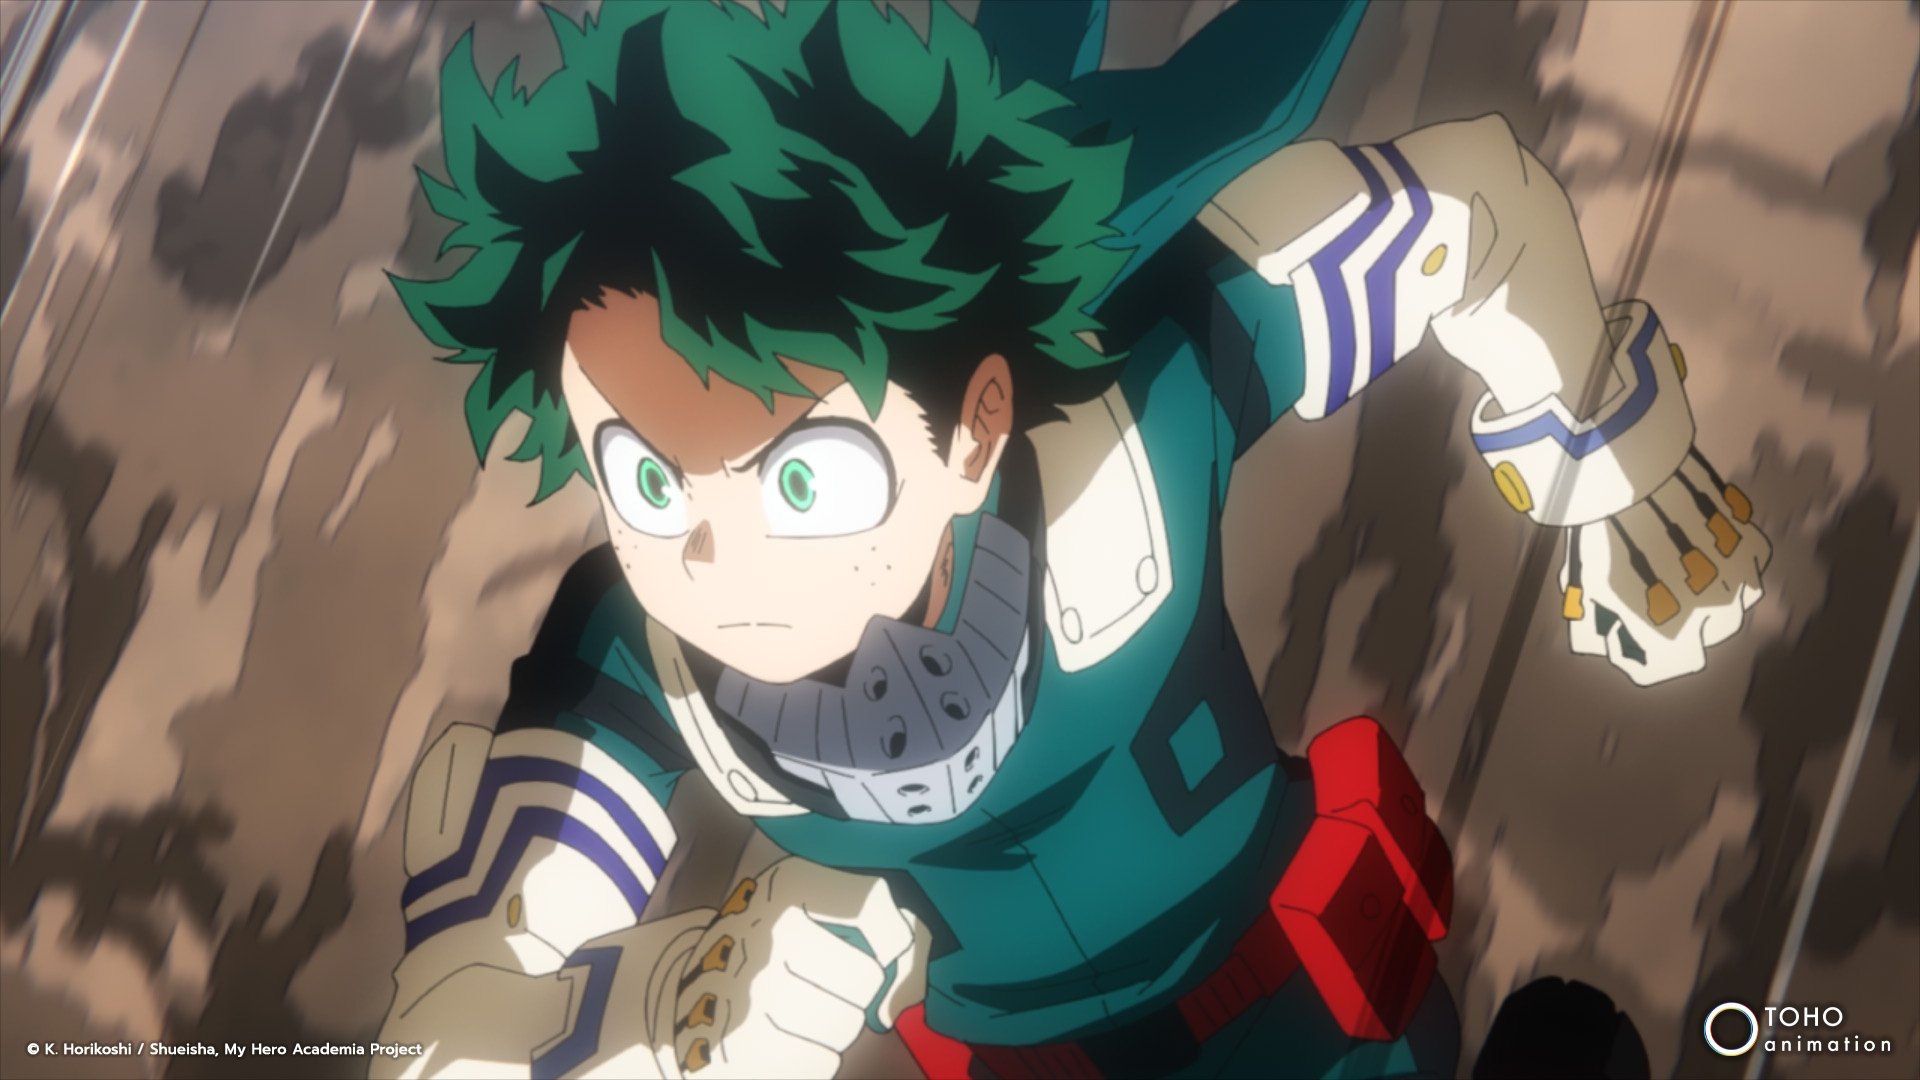 Deku in 'My Hero Academia' Season 6 for our article about episode 10. He's running down a dirt slope and looks determined.